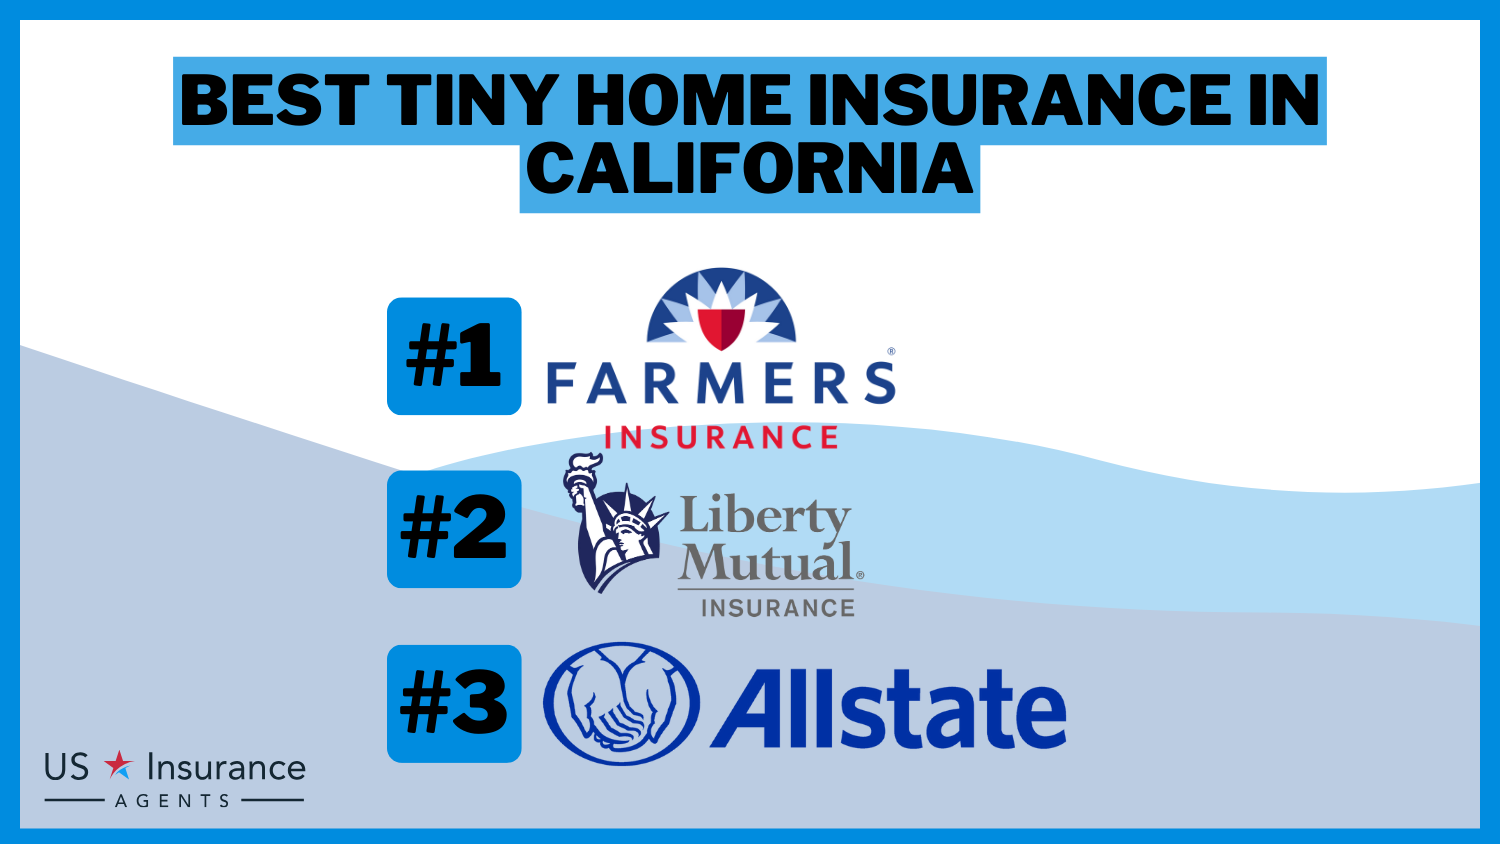 Best Tiny Home Insurance in California: Farmers, Liberty Mutual, and Allstate